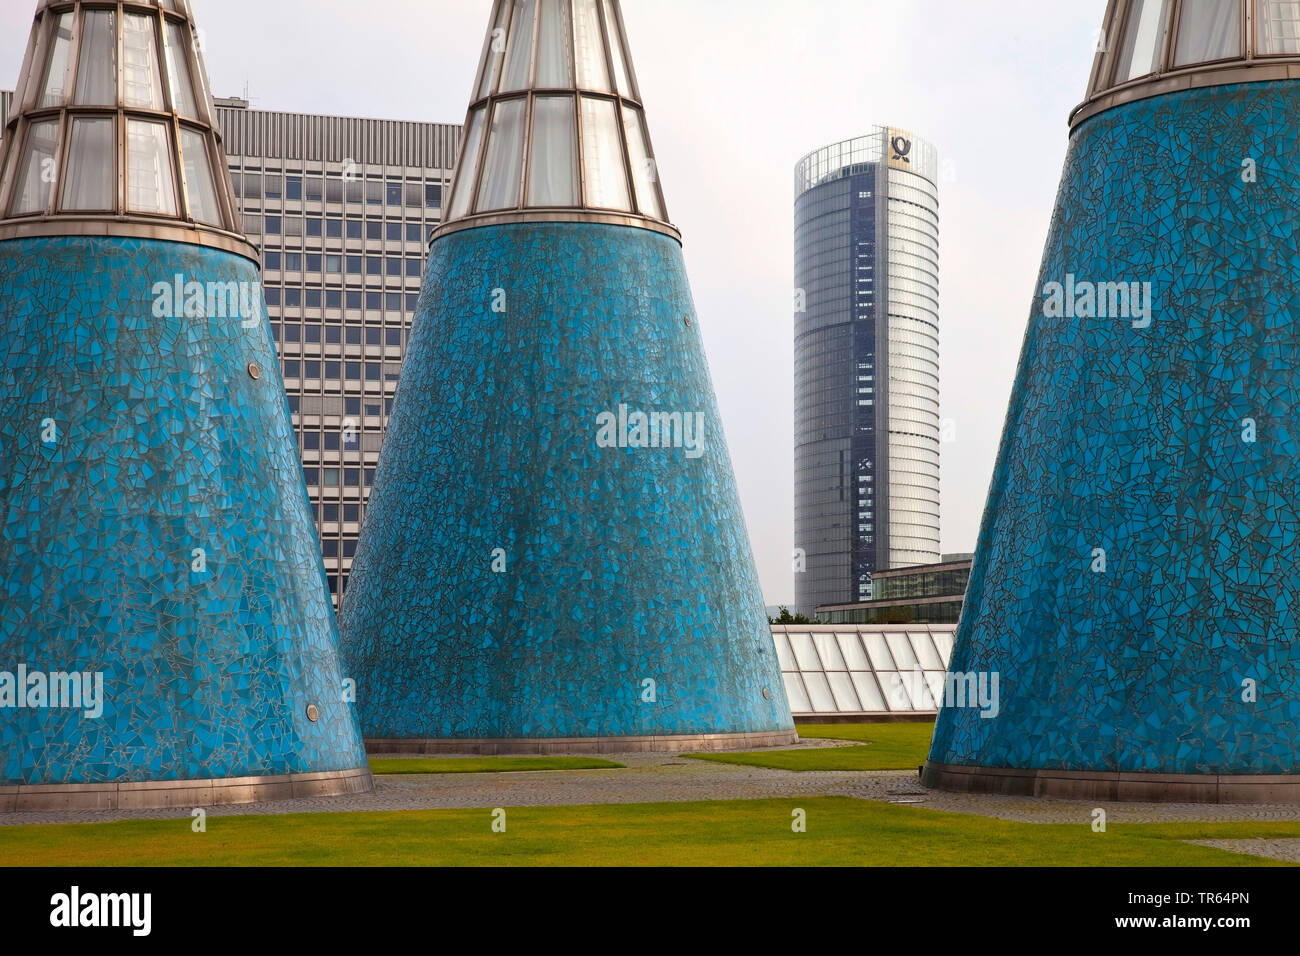 roof garden of the Art and Exhibition Hall with conical light wells and Post Tower, Germany, North Rhine-Westphalia, Bonn Stock Photo